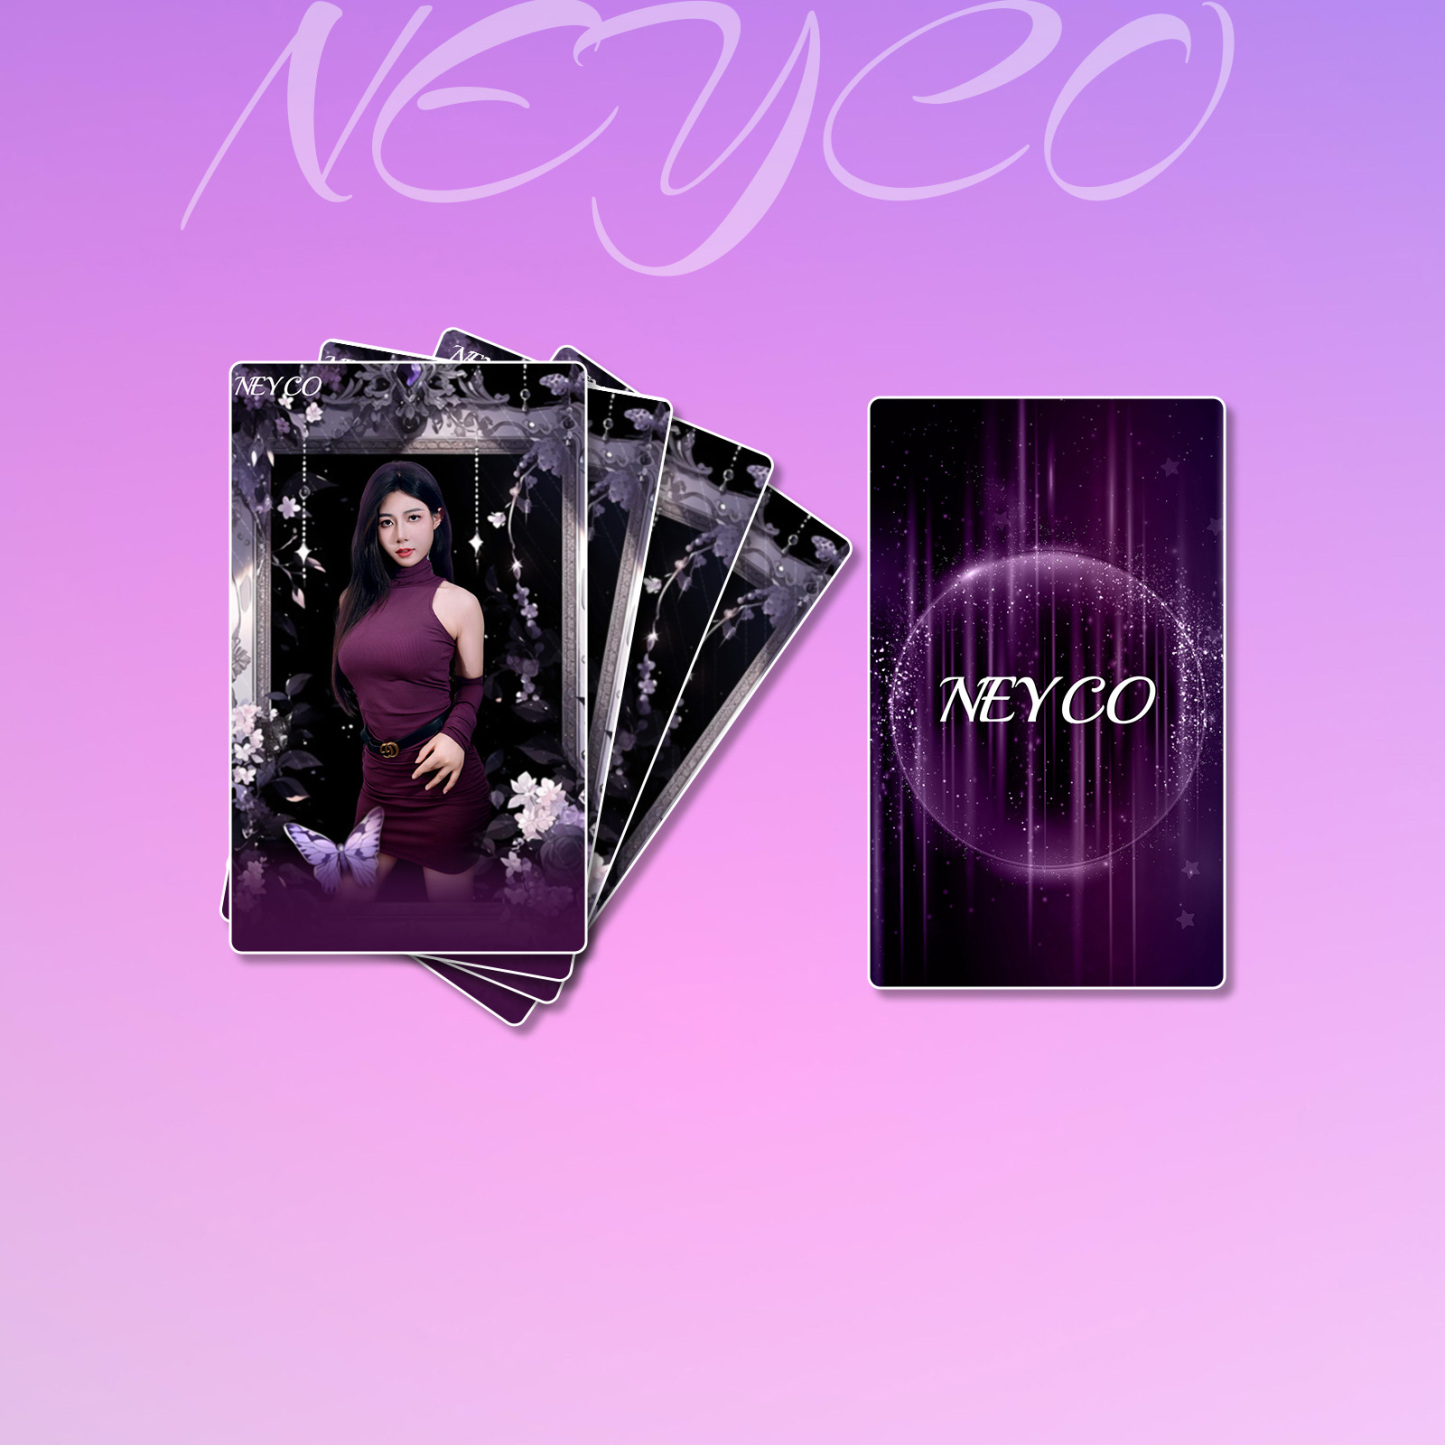 Neyco collection cards